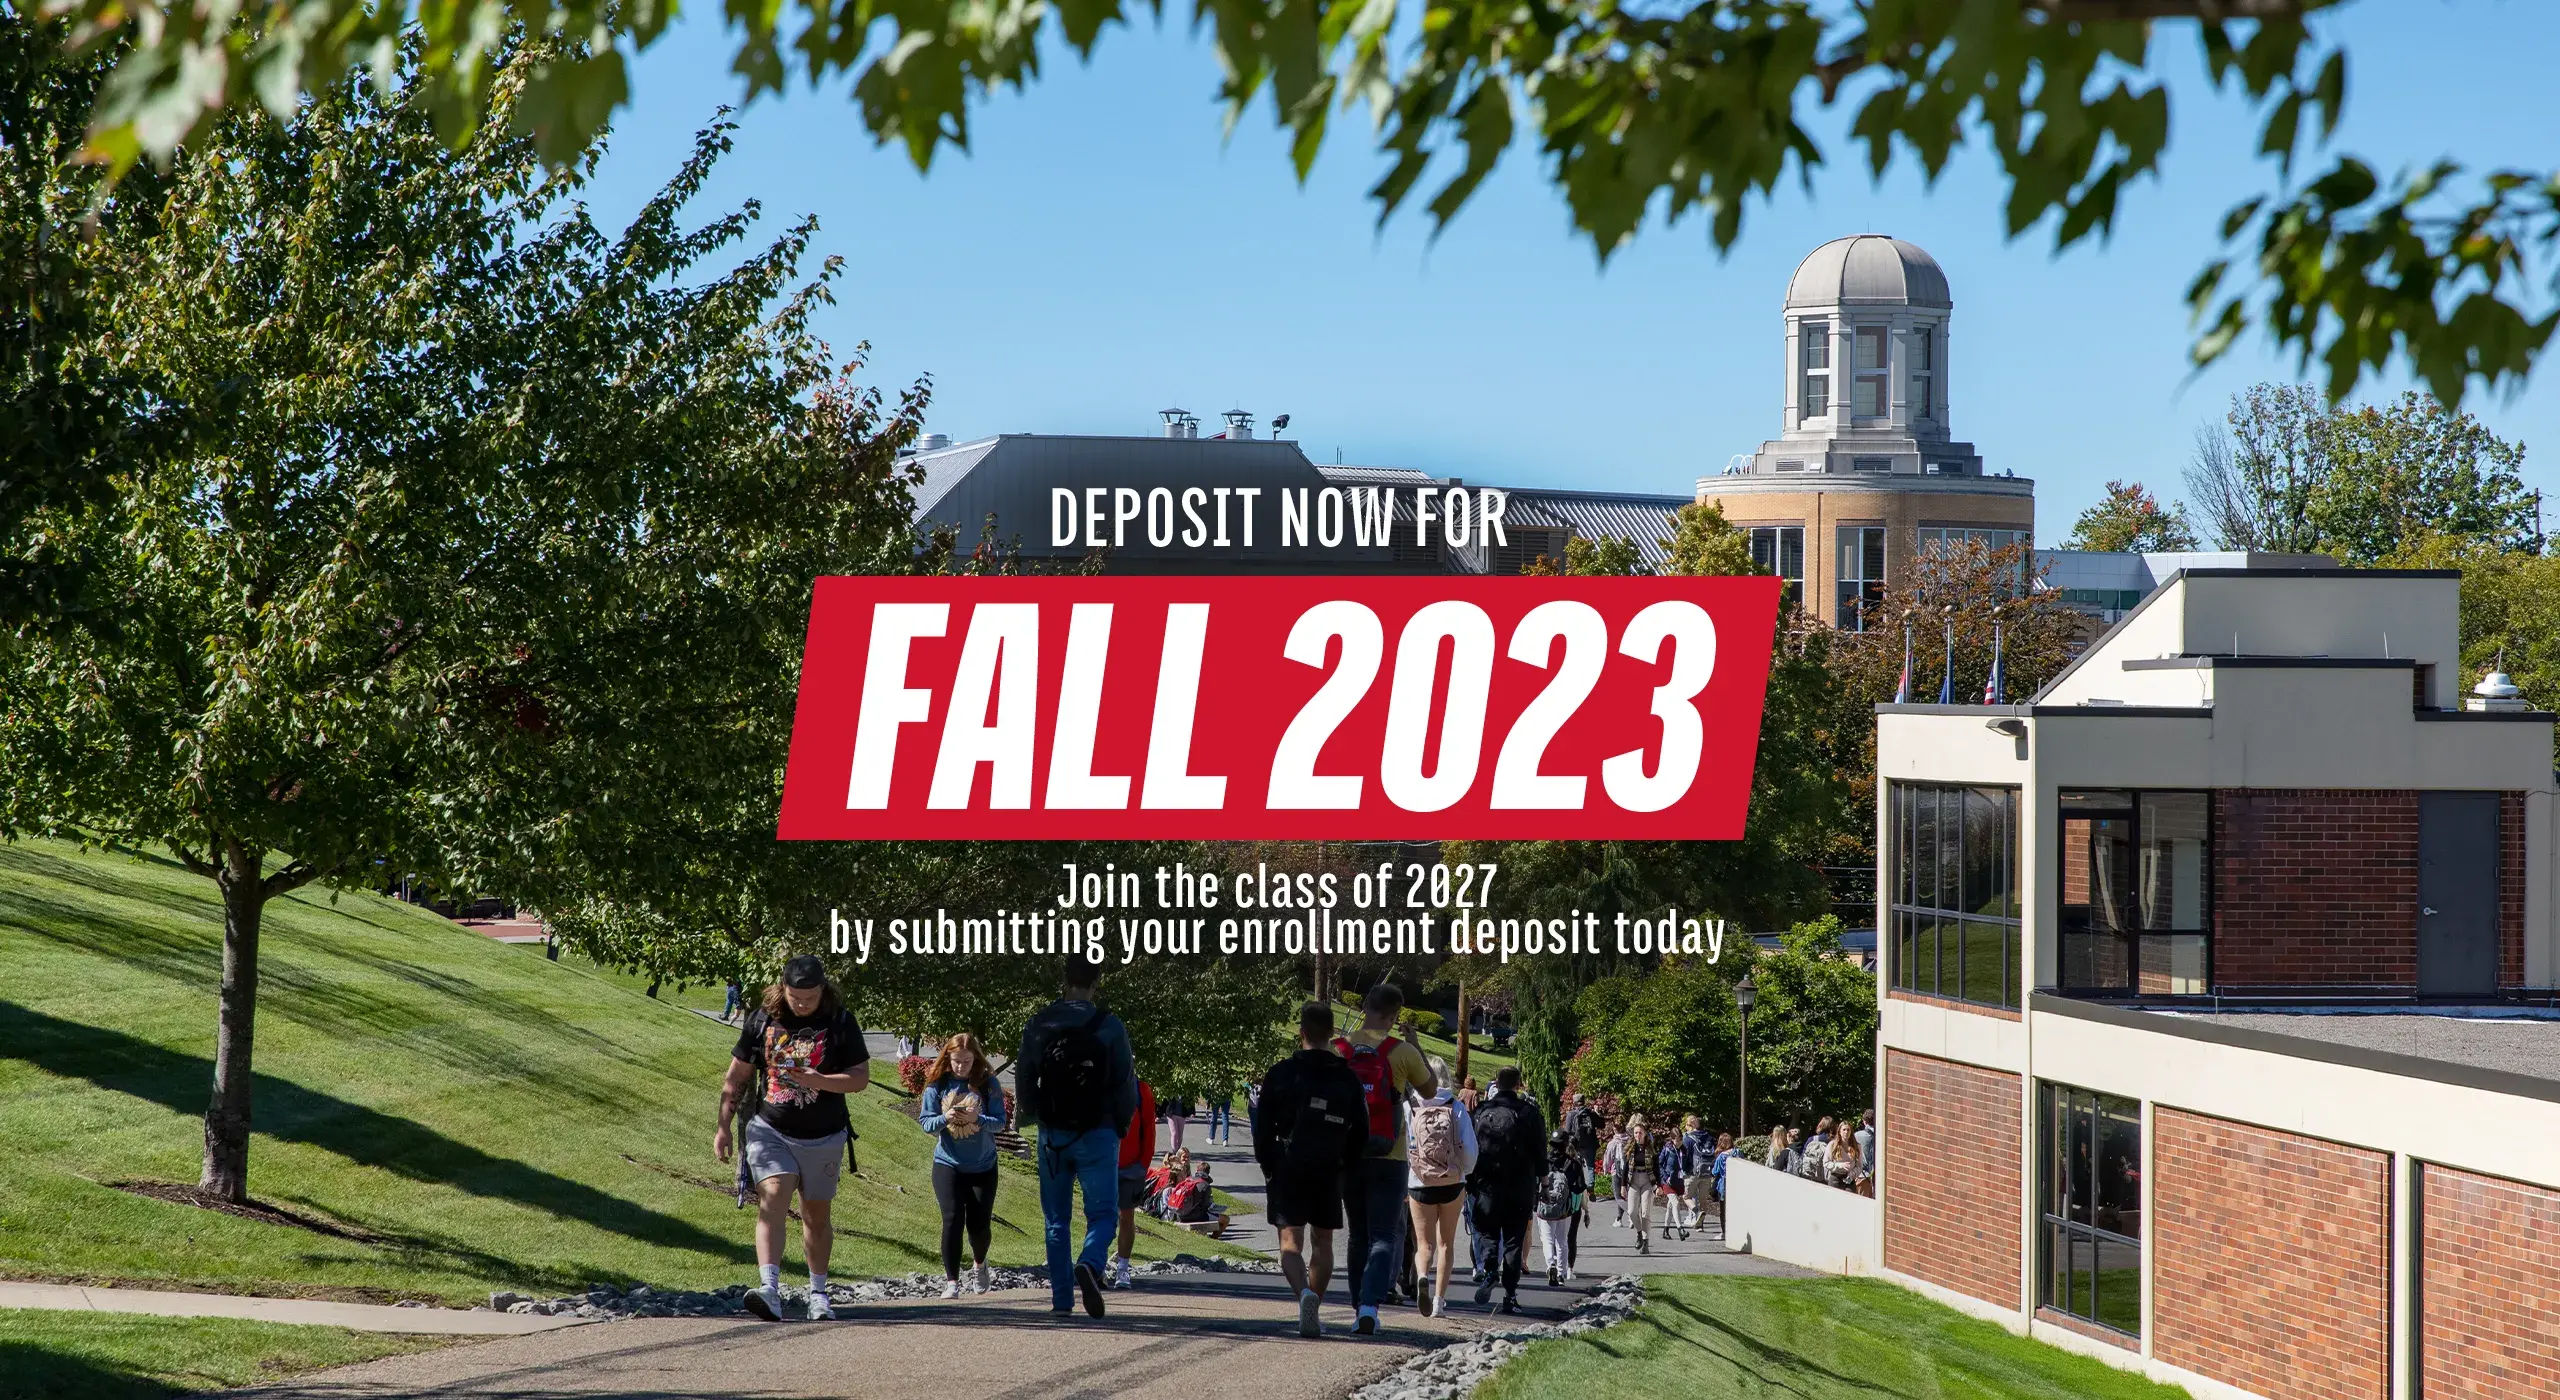 Deposit now for Fall 2023